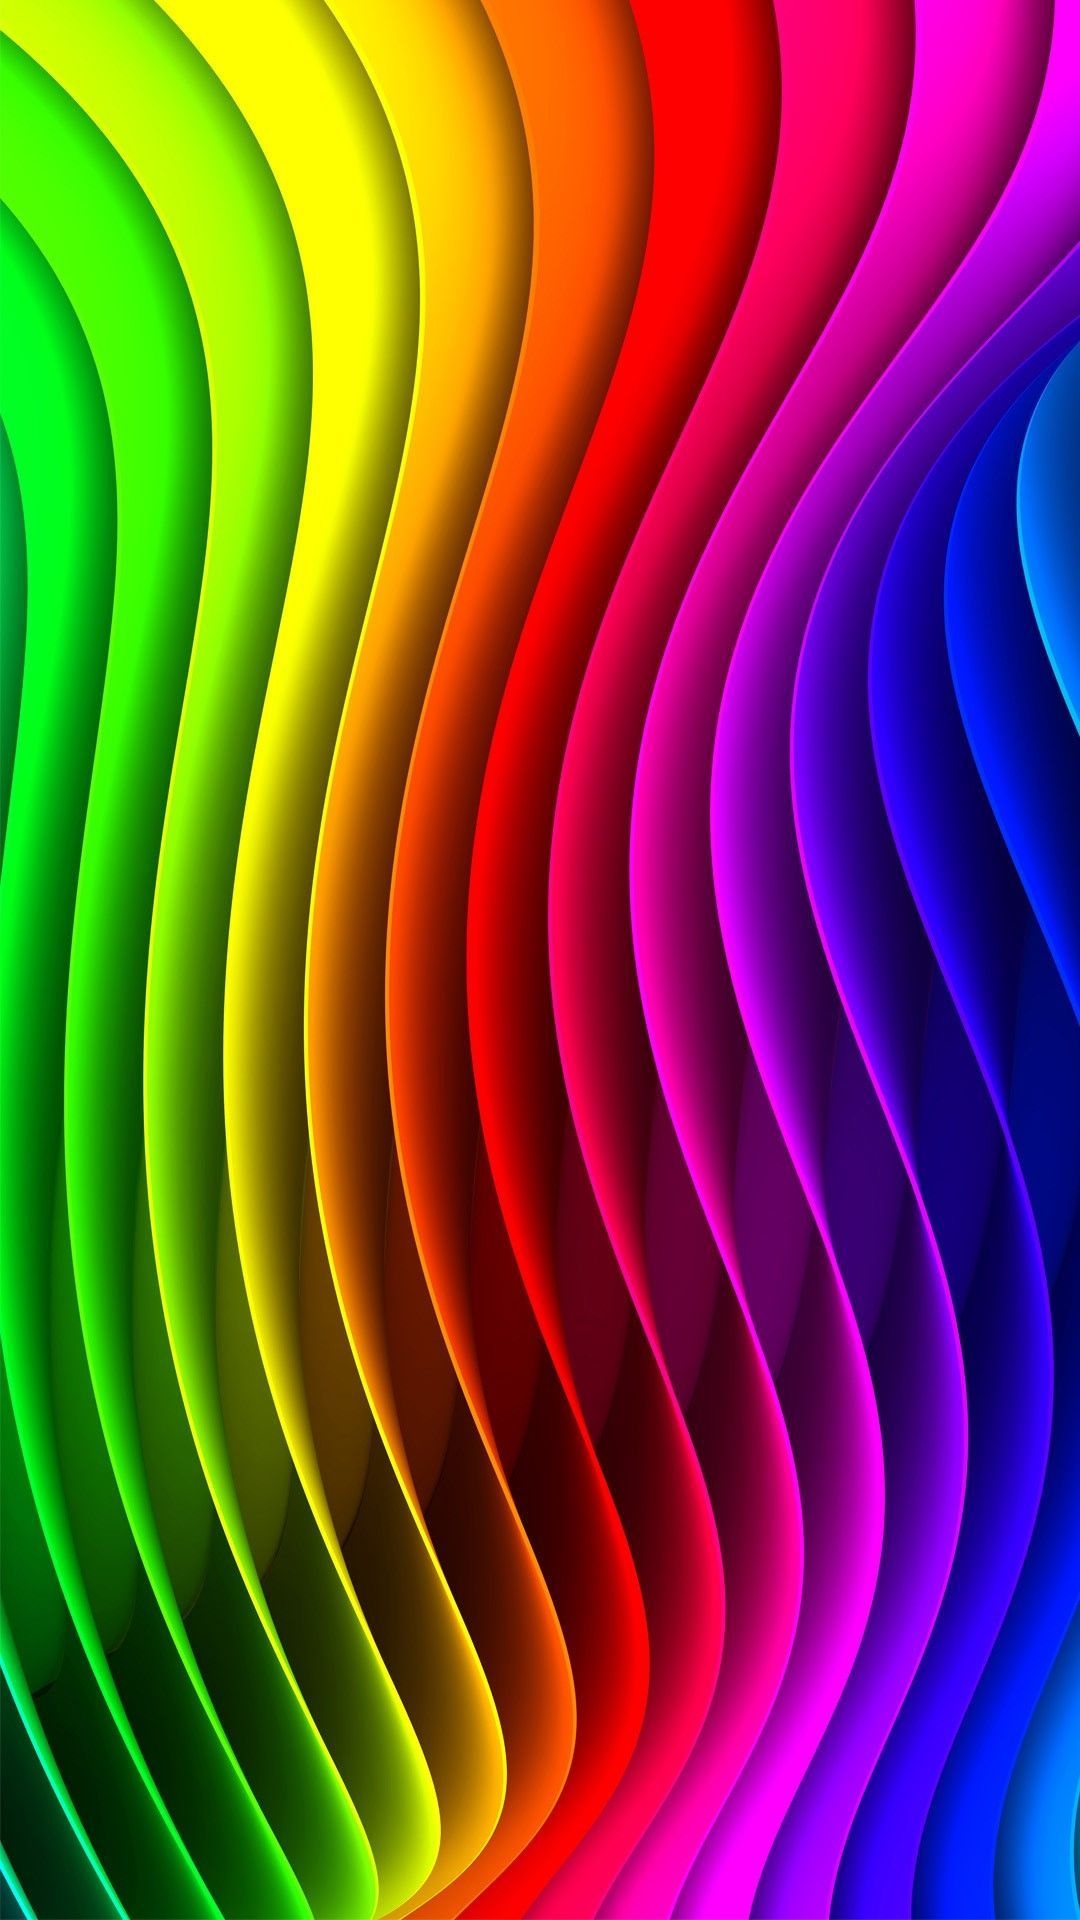 Abstract rainbow wallpapers, Colorful and abstract, Unique and creative, Artistic expression, 1080x1920 Full HD Handy